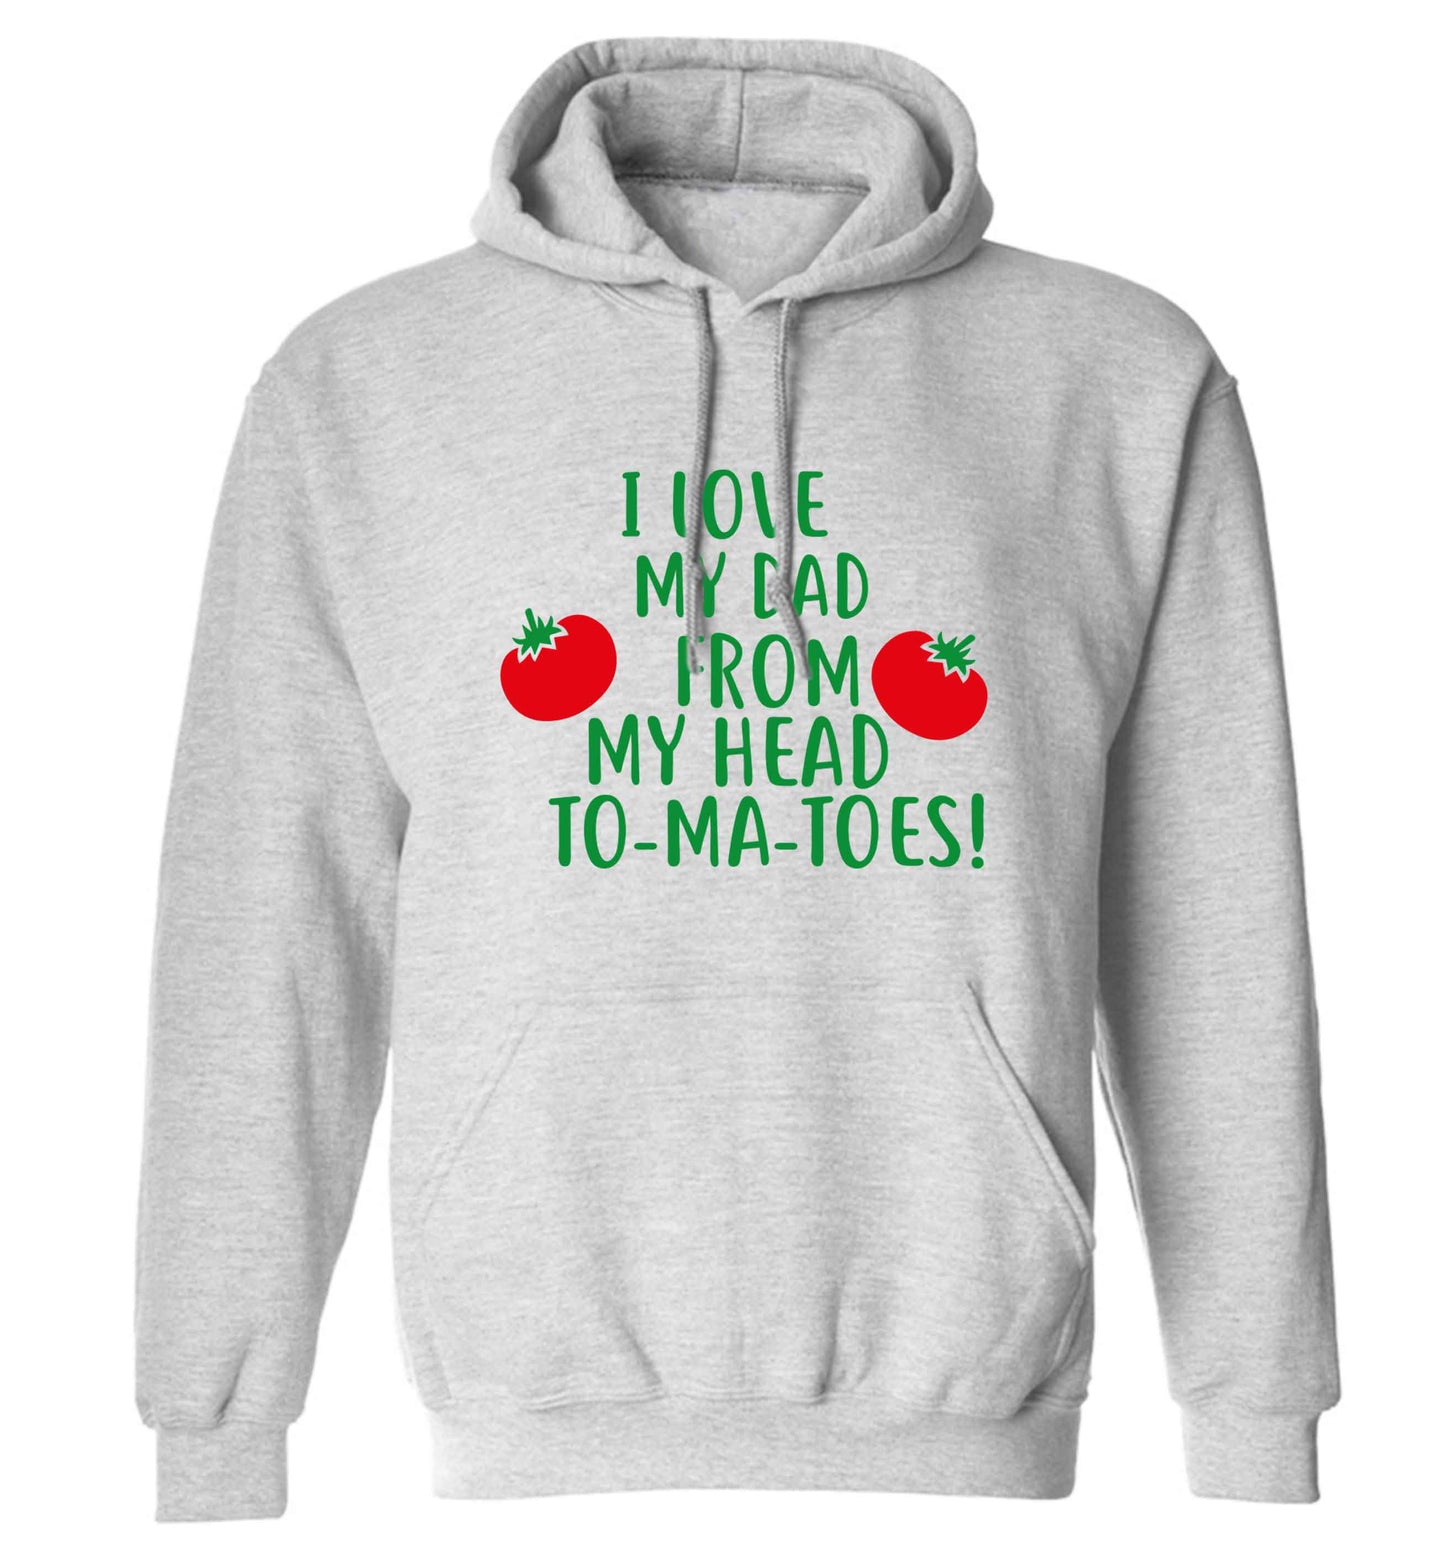 I love my dad from my head to-ma-toes adults unisex grey hoodie 2XL